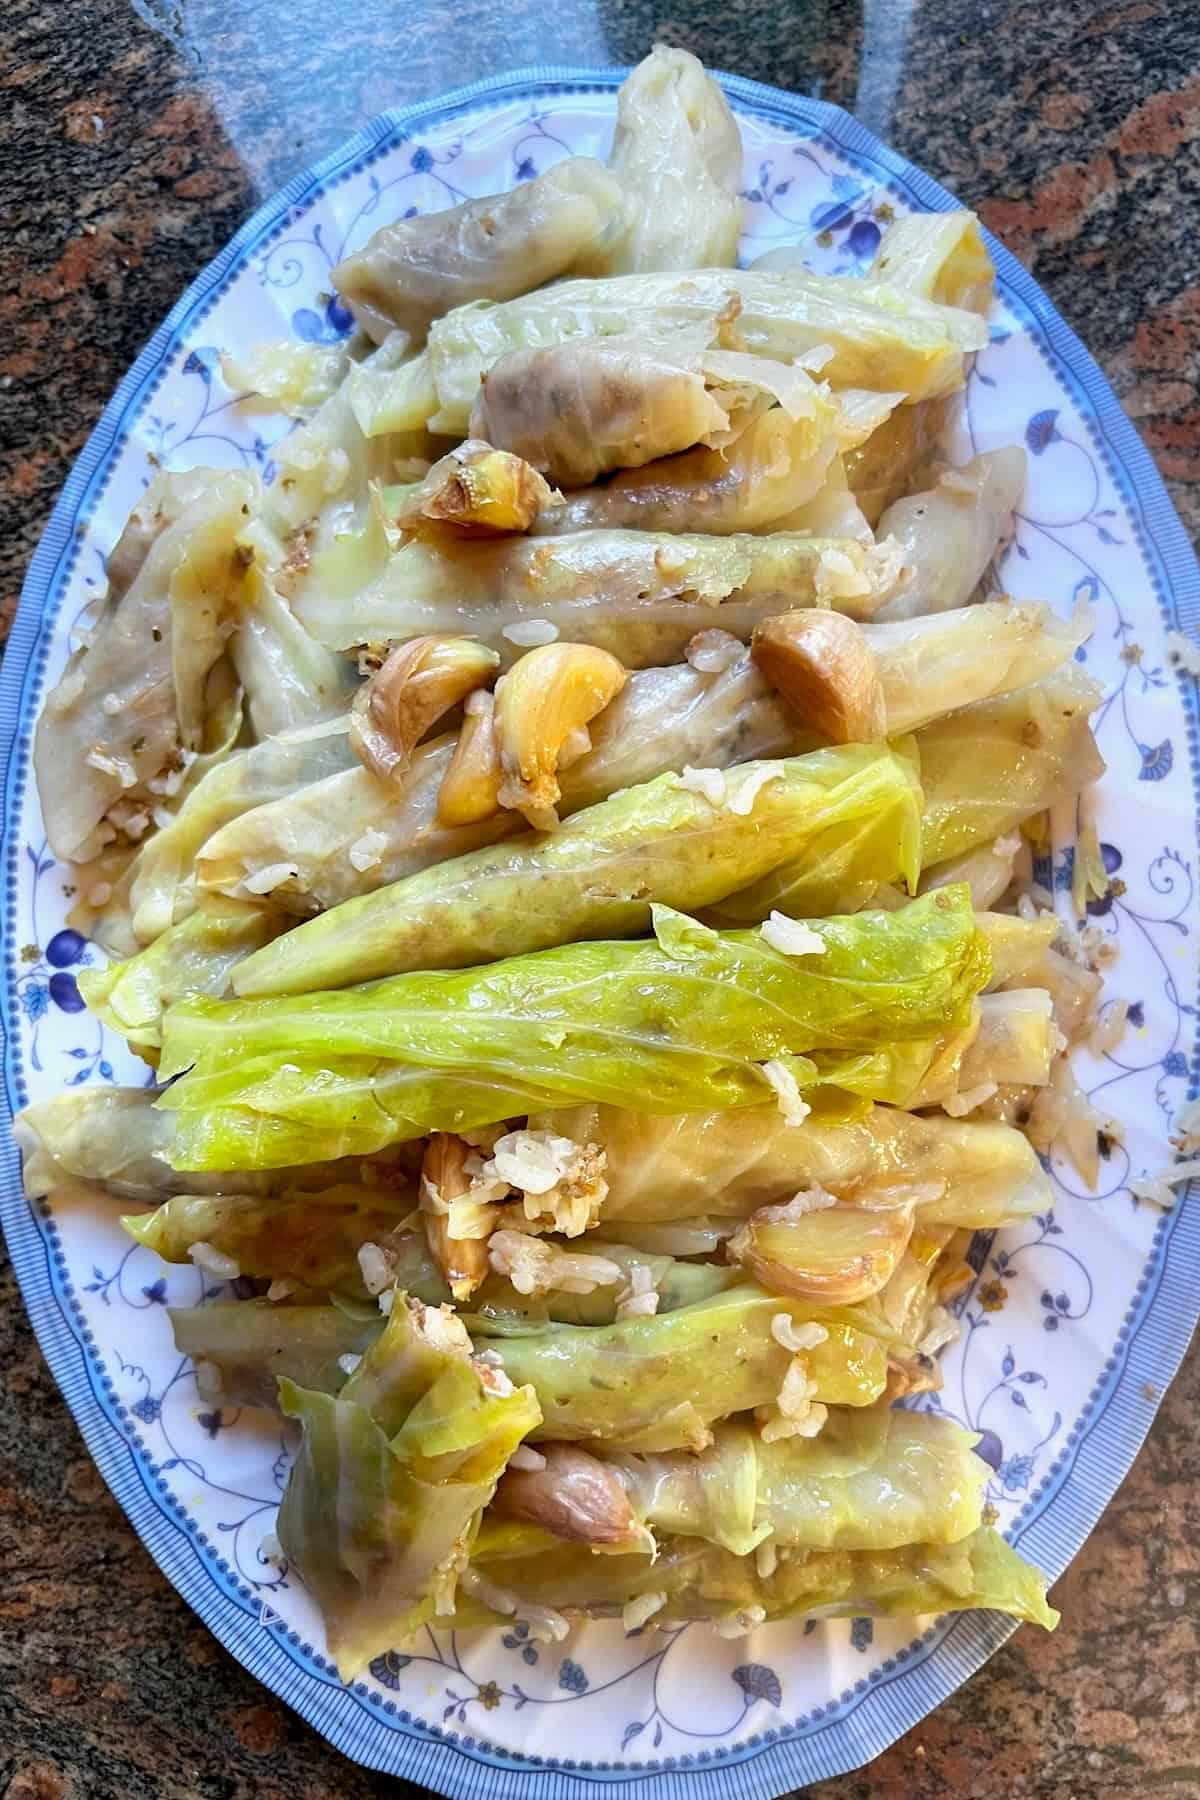 A serving of stuffed cabbage rolls malfouf